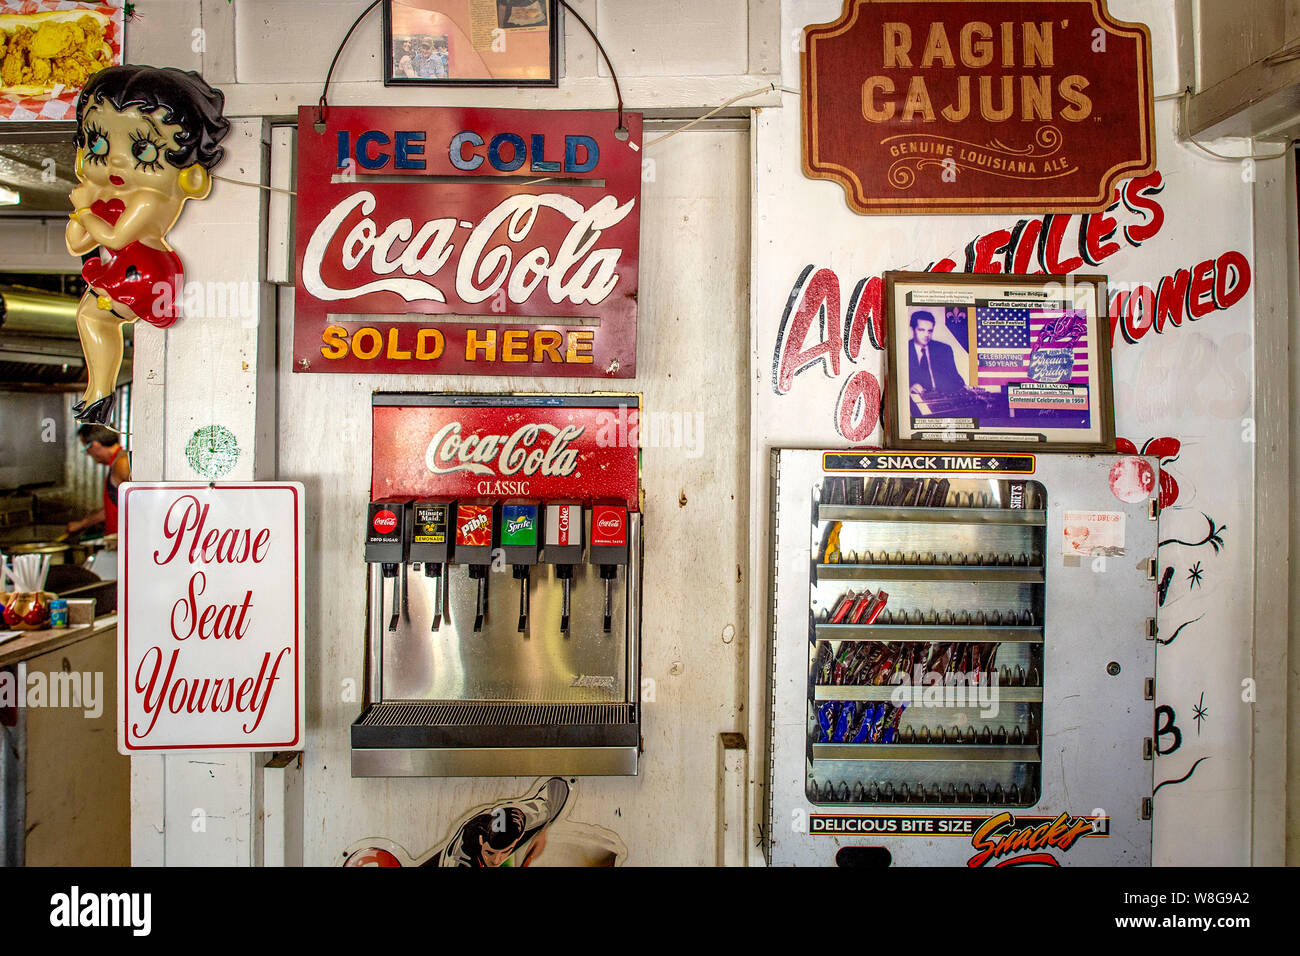 Coca-Cola sign above soda machine and candy machine at Angelle's Burgers in Breaux Bridge Louisana September 21, 2018 Stock Photo